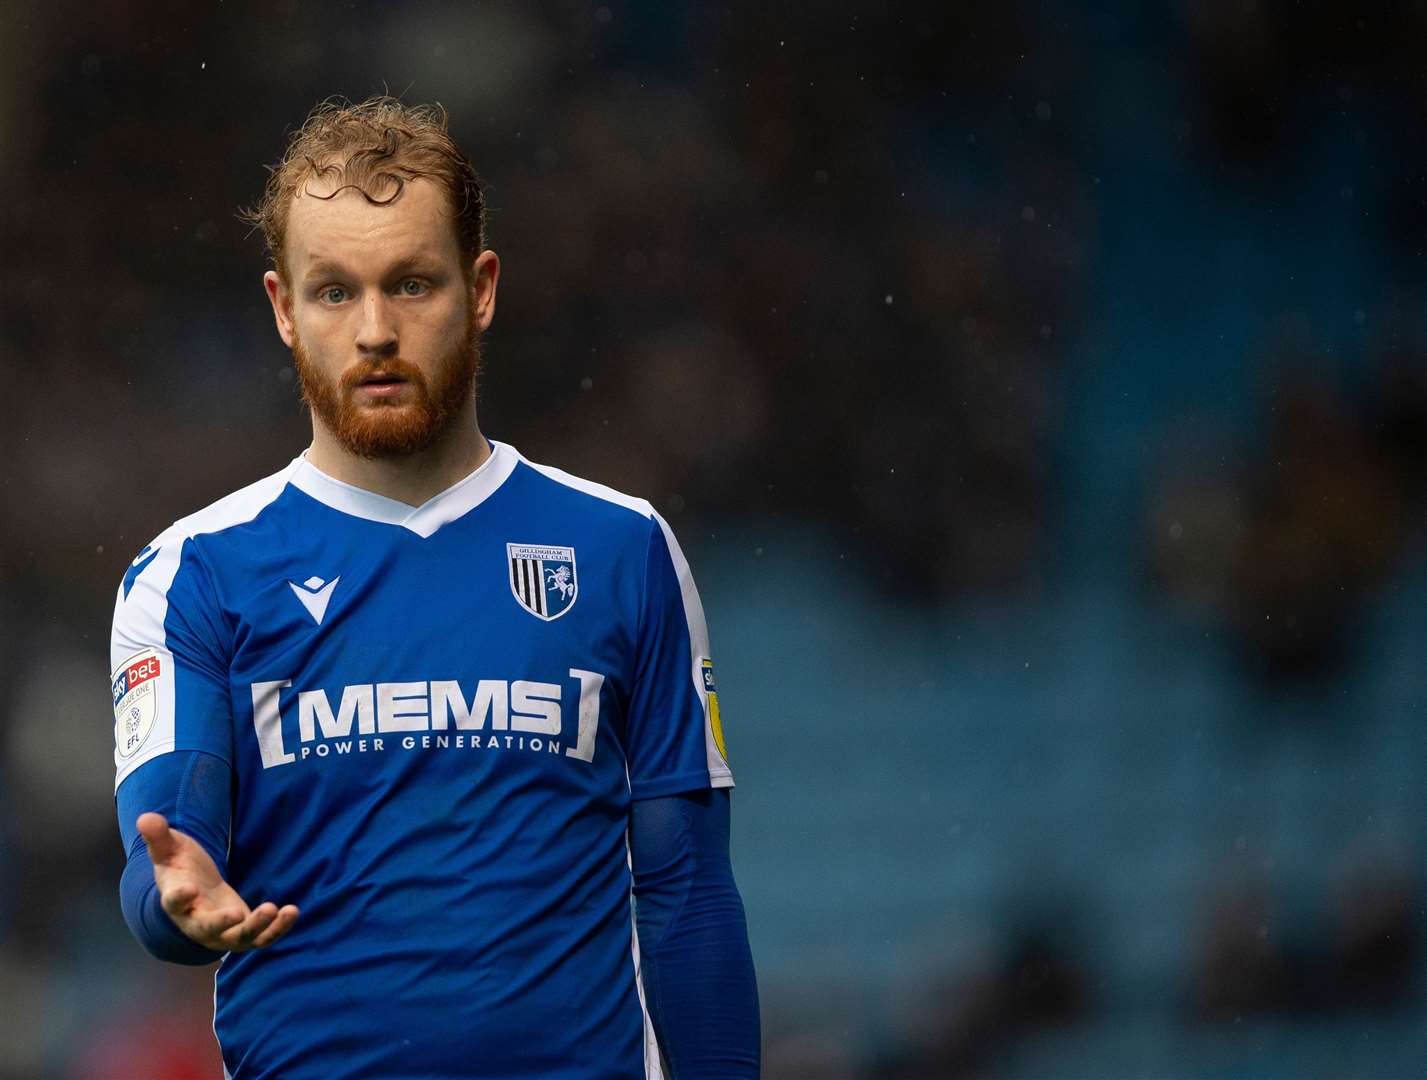 Connor Ogilvie had continued to impress at Gillingham and is attracting interest